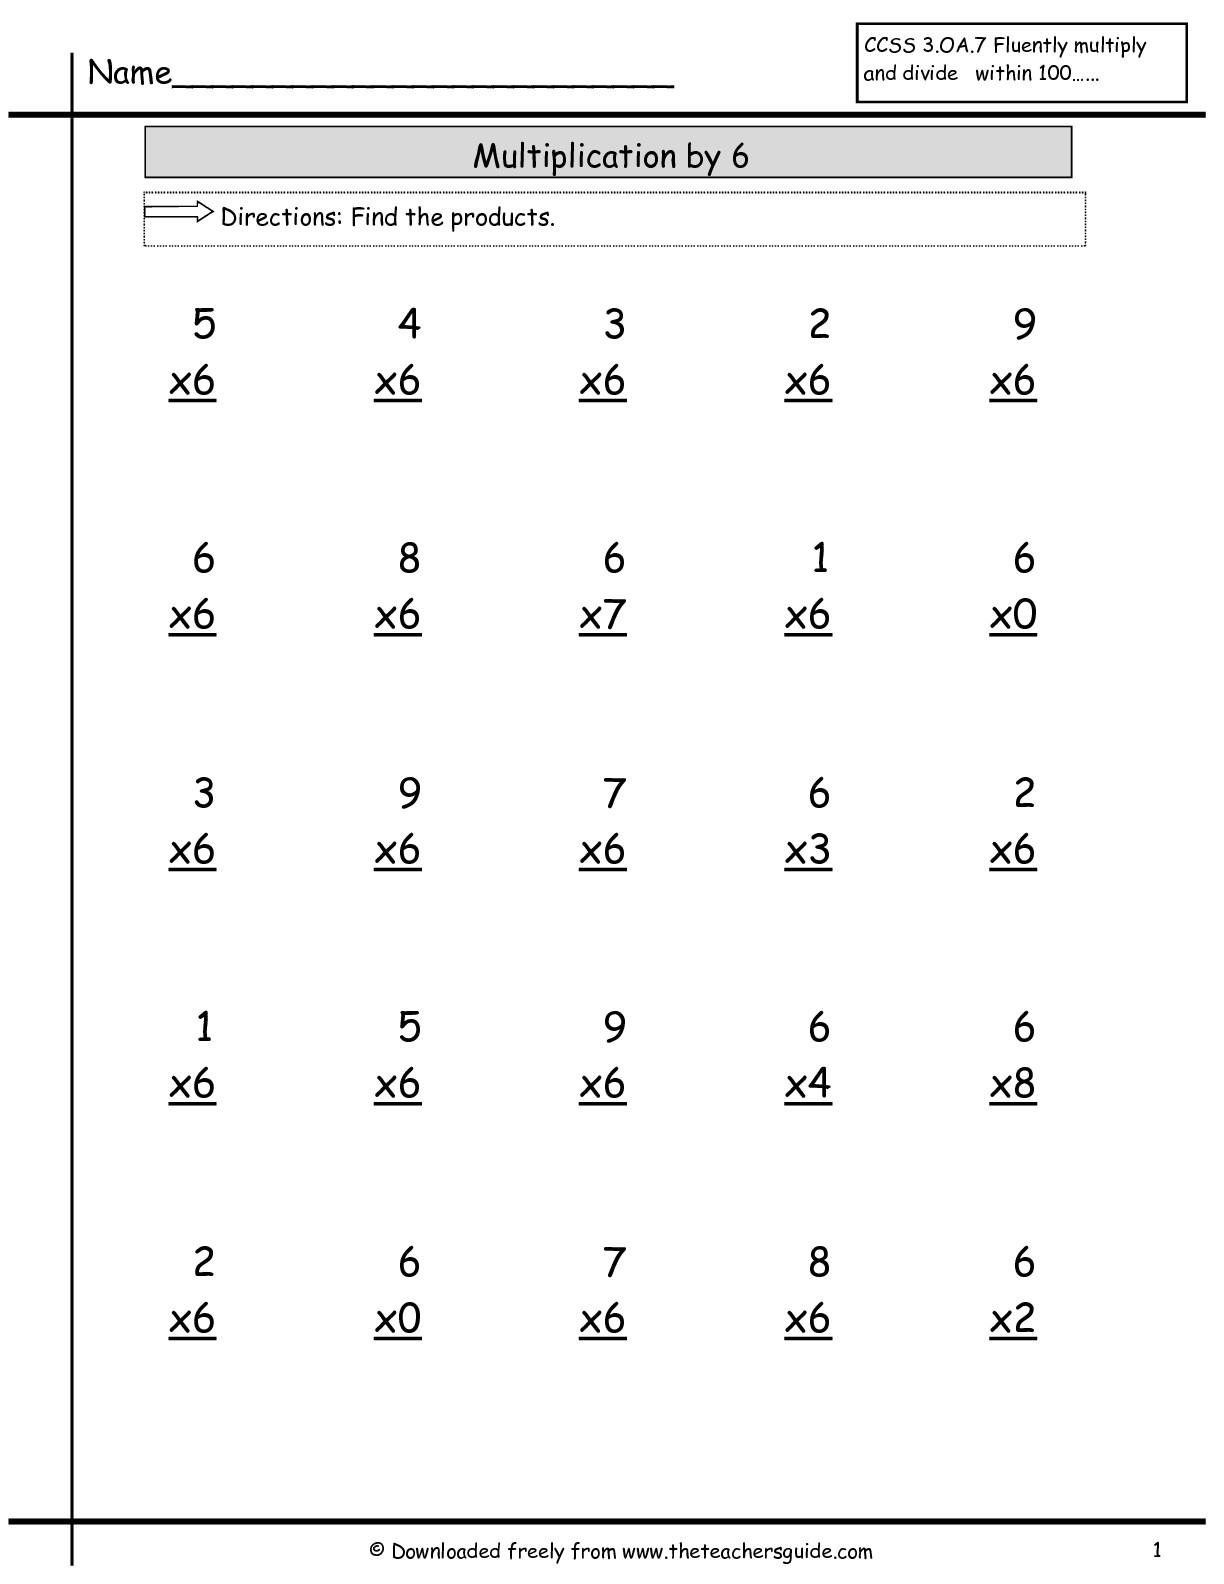 Multiplication Facts Worksheets From The Teacher&amp;#039;s Guide regarding Multiplication Worksheets X3 And X4